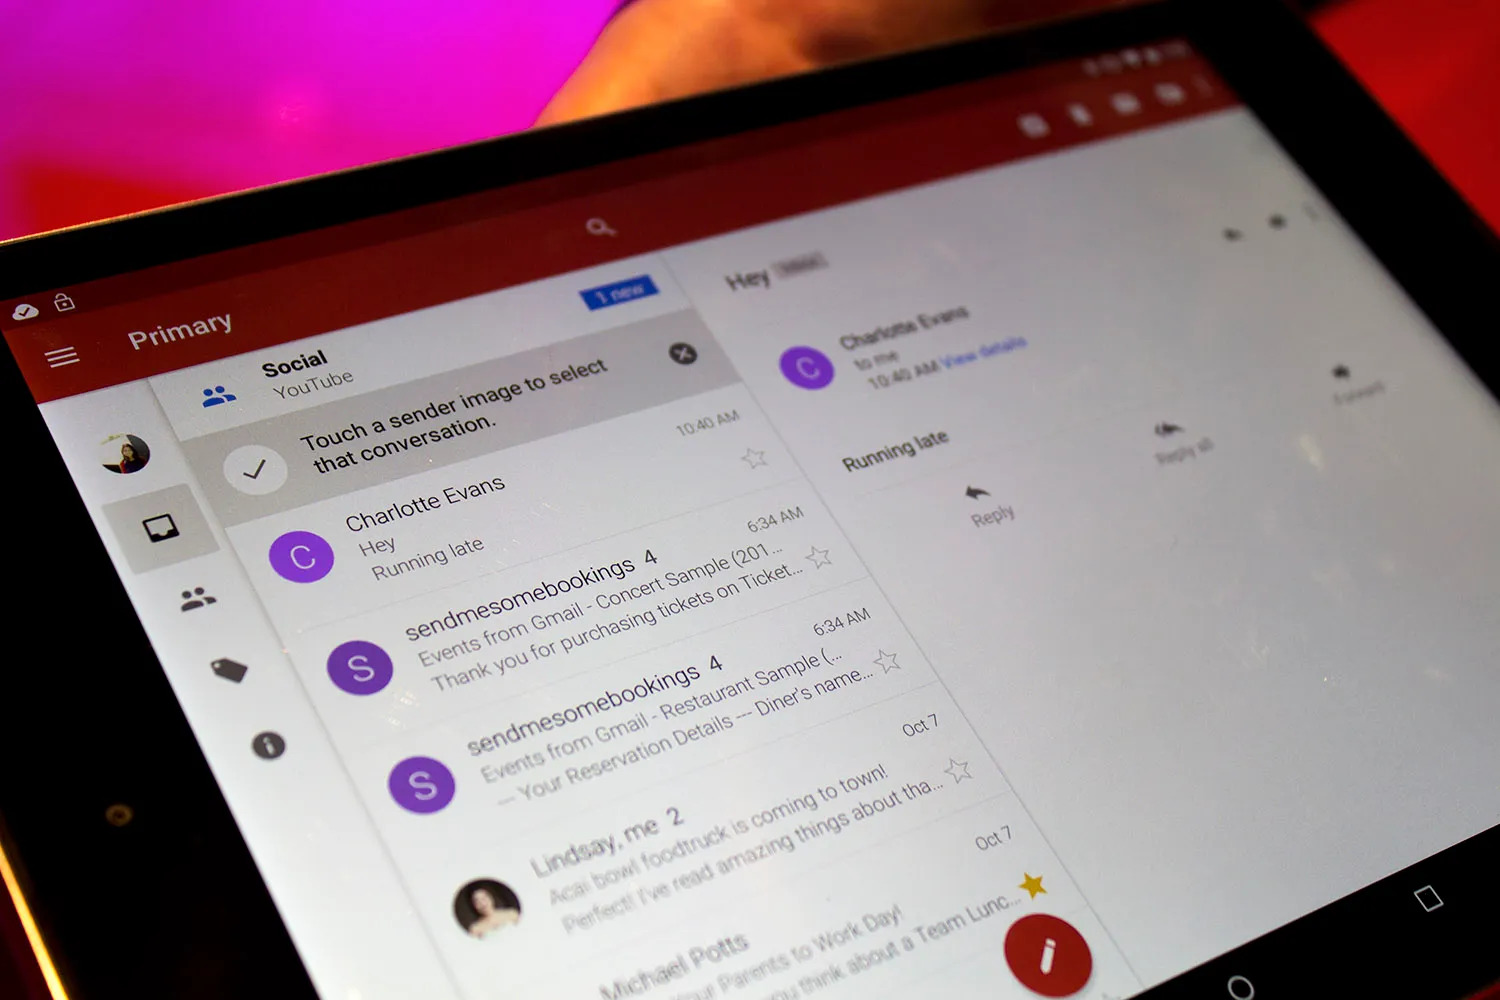 How To Add A Folder In Gmail On A Tablet